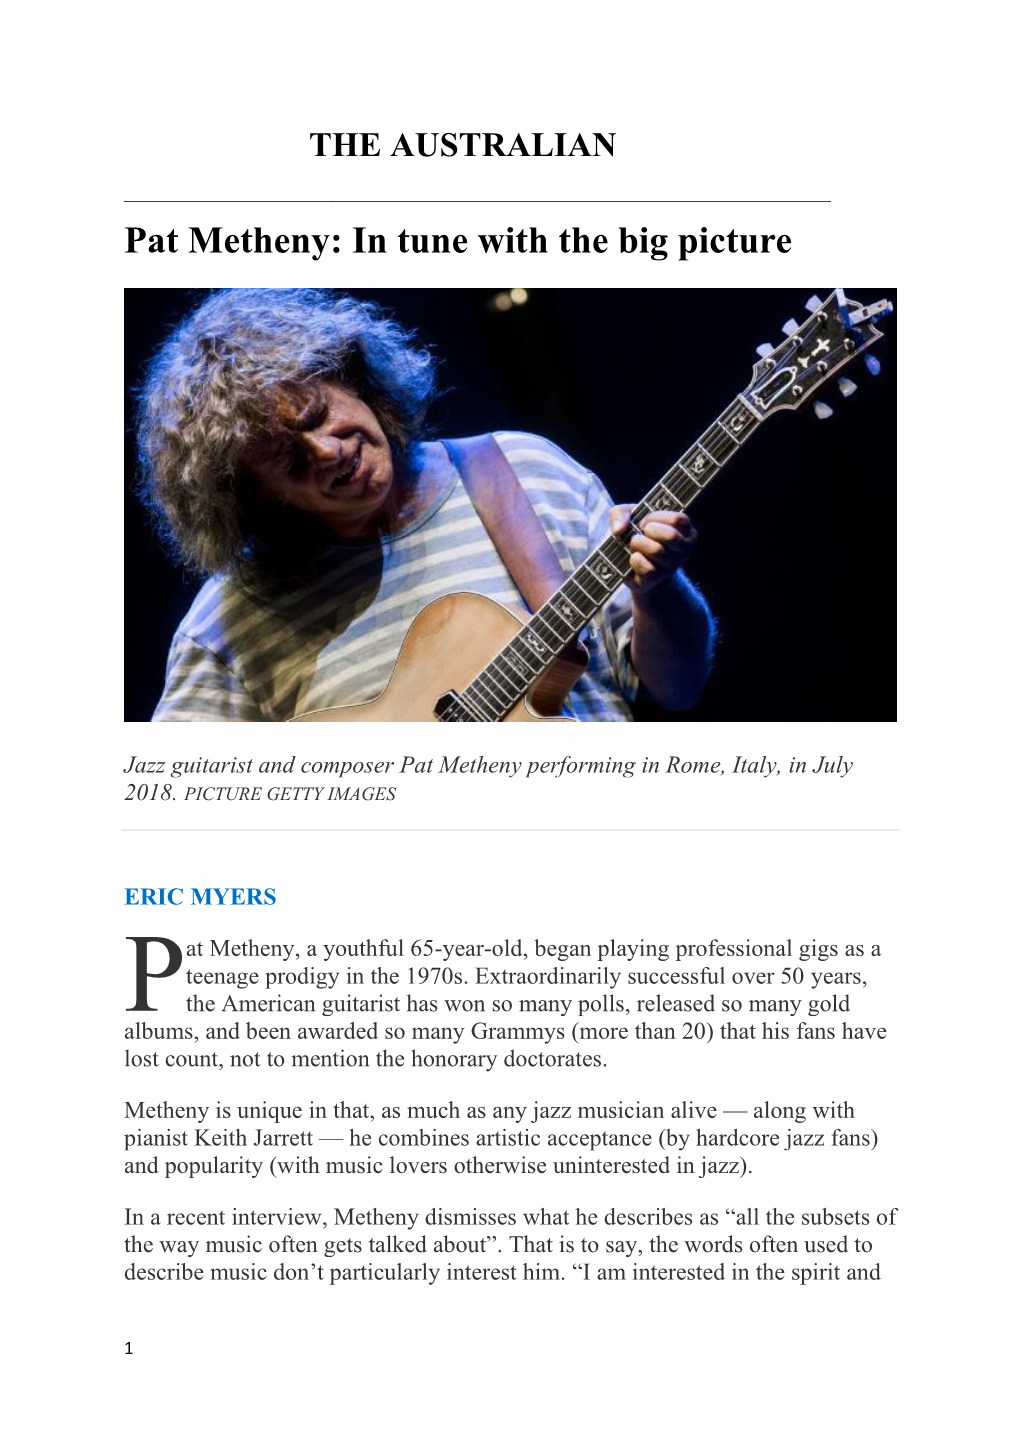 Pat Metheny: in Tune with the Big Picture